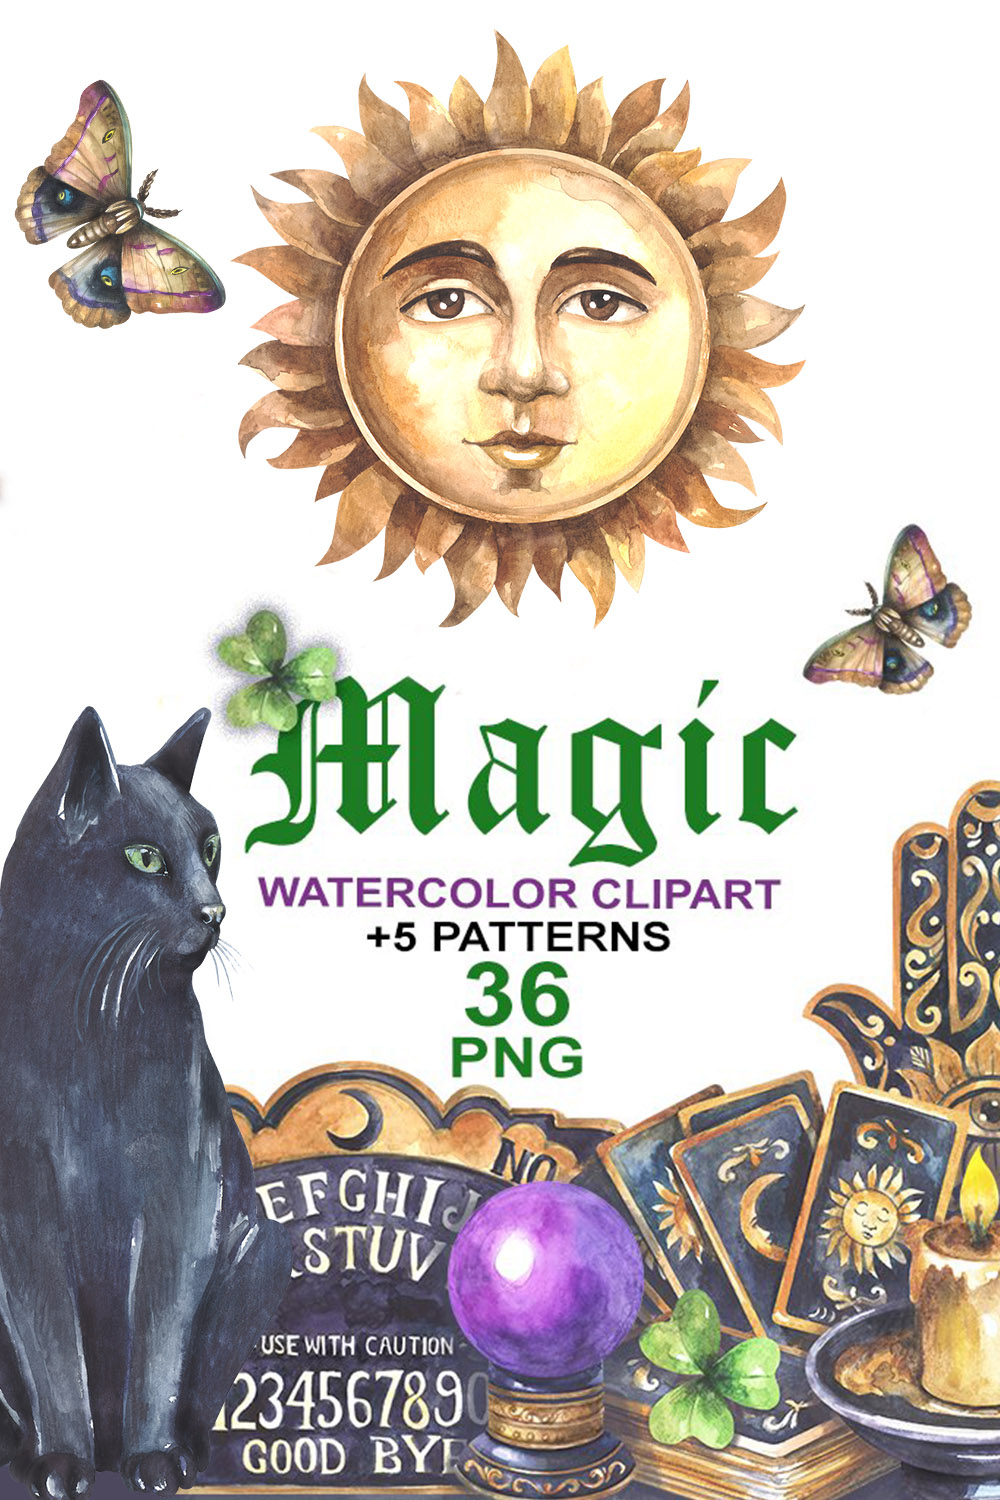 Magic Collection Watercolor Clipart Pinterest Image.